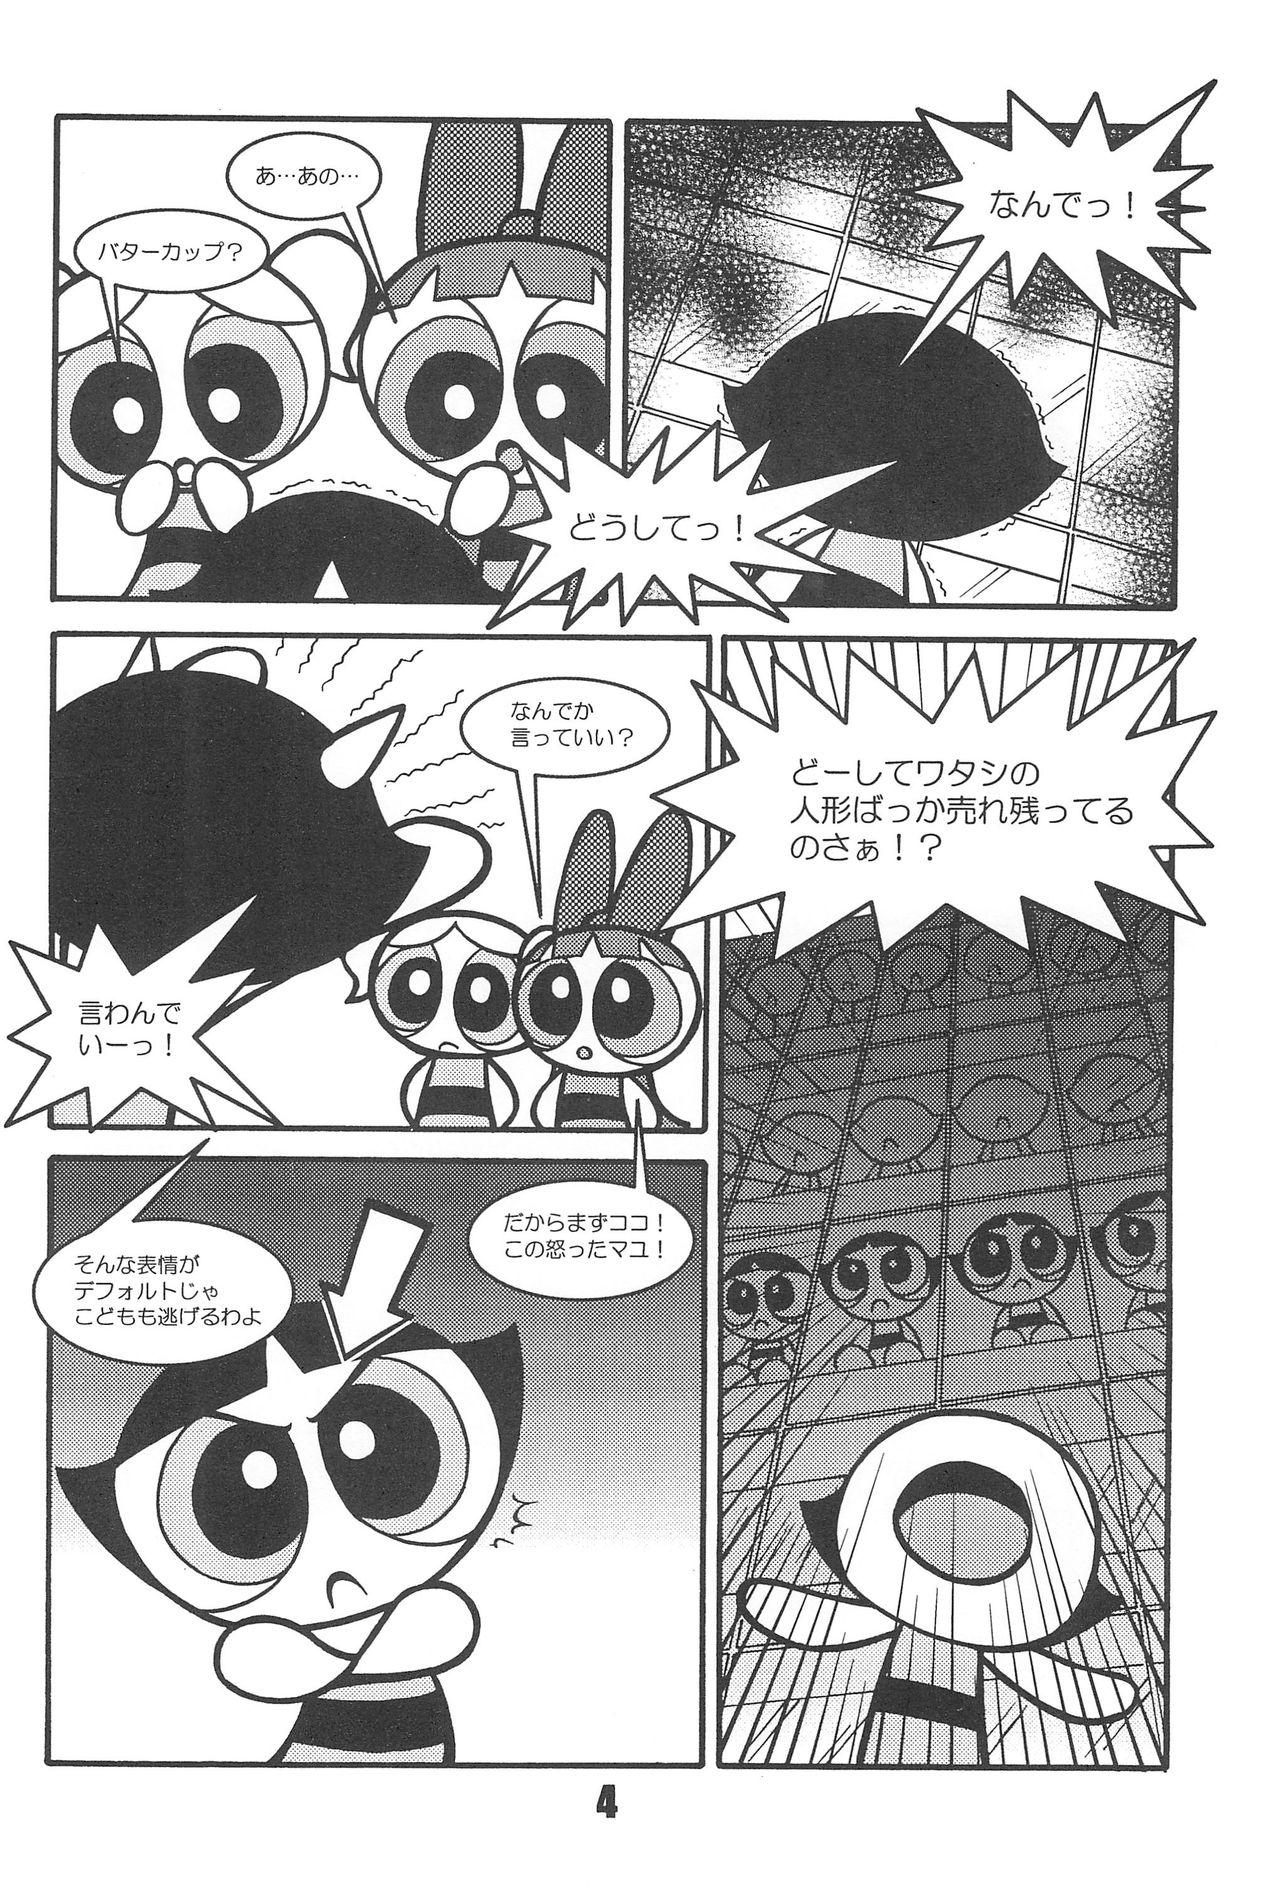 Blowjobs Show Goes On! Funhouse 22th - The powerpuff girls Round Ass - Page 4